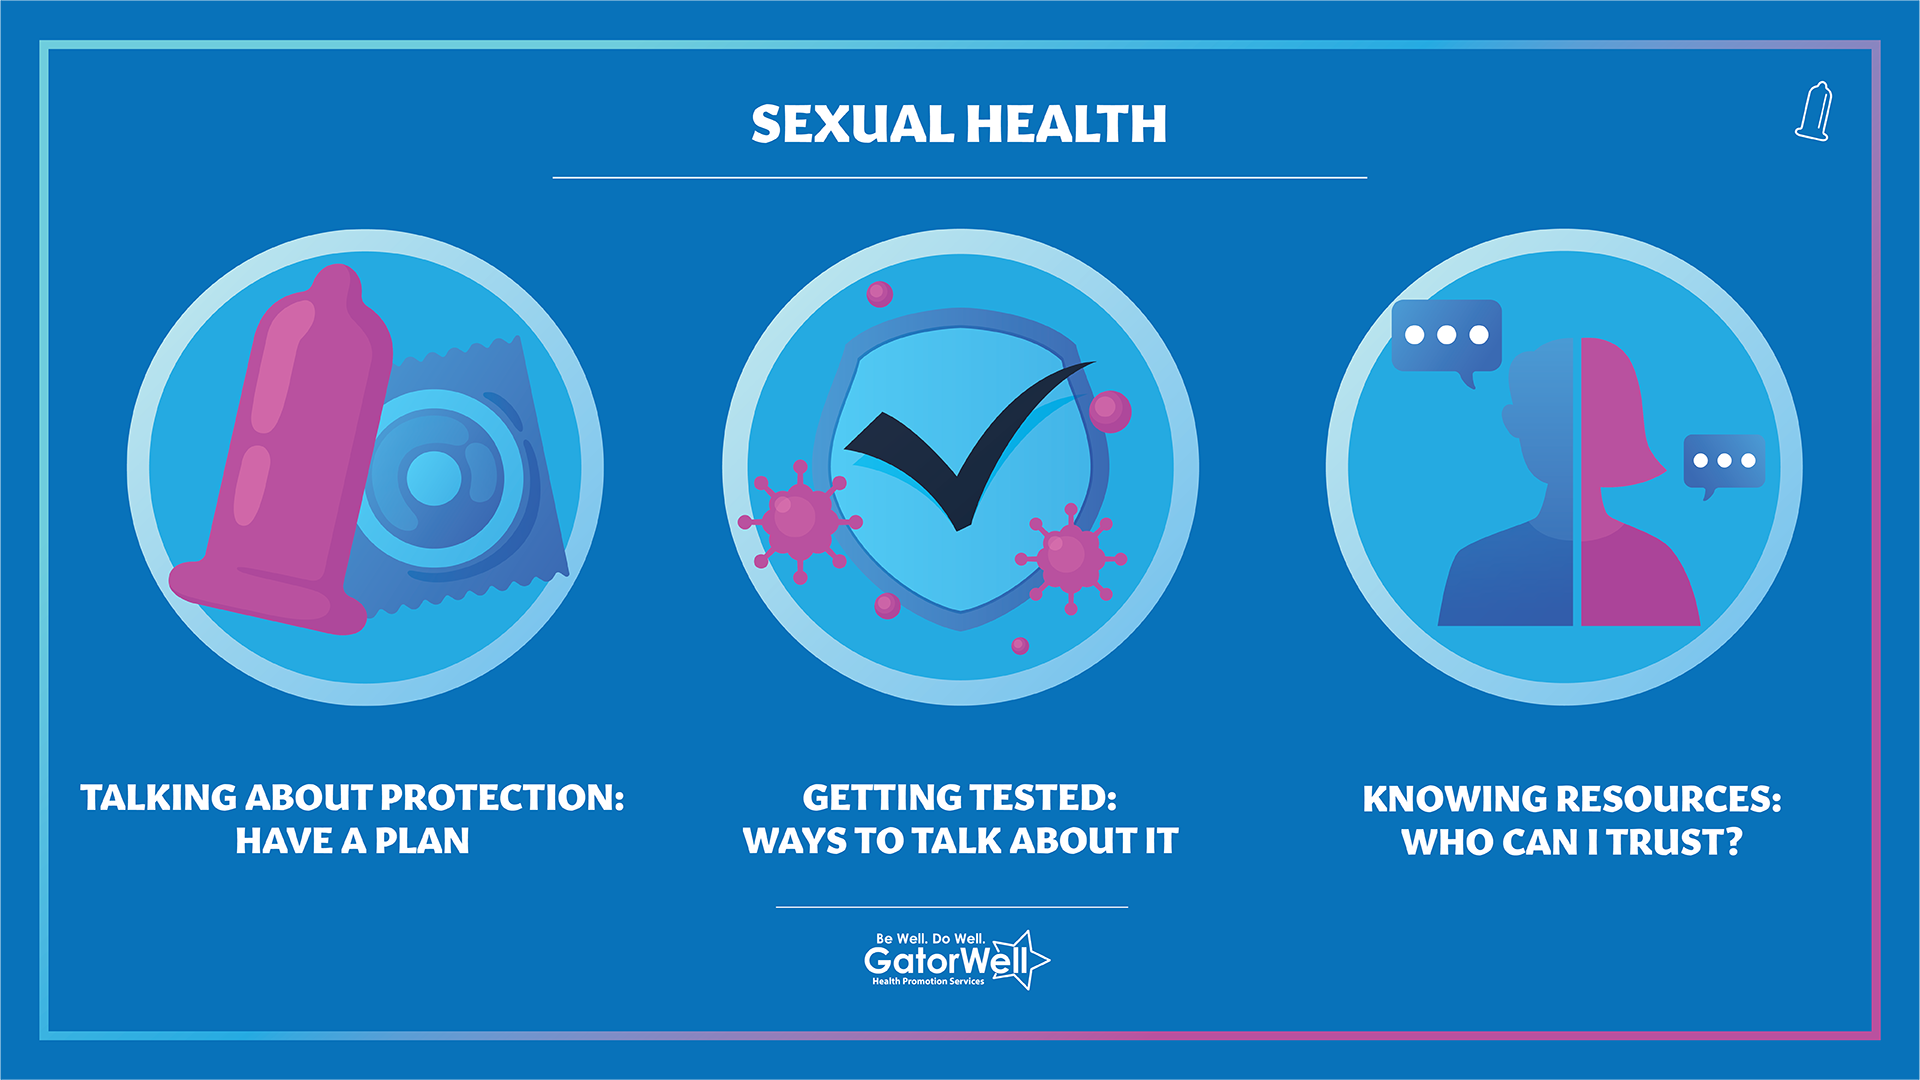 Sexual Health - Let's Talk About Sex